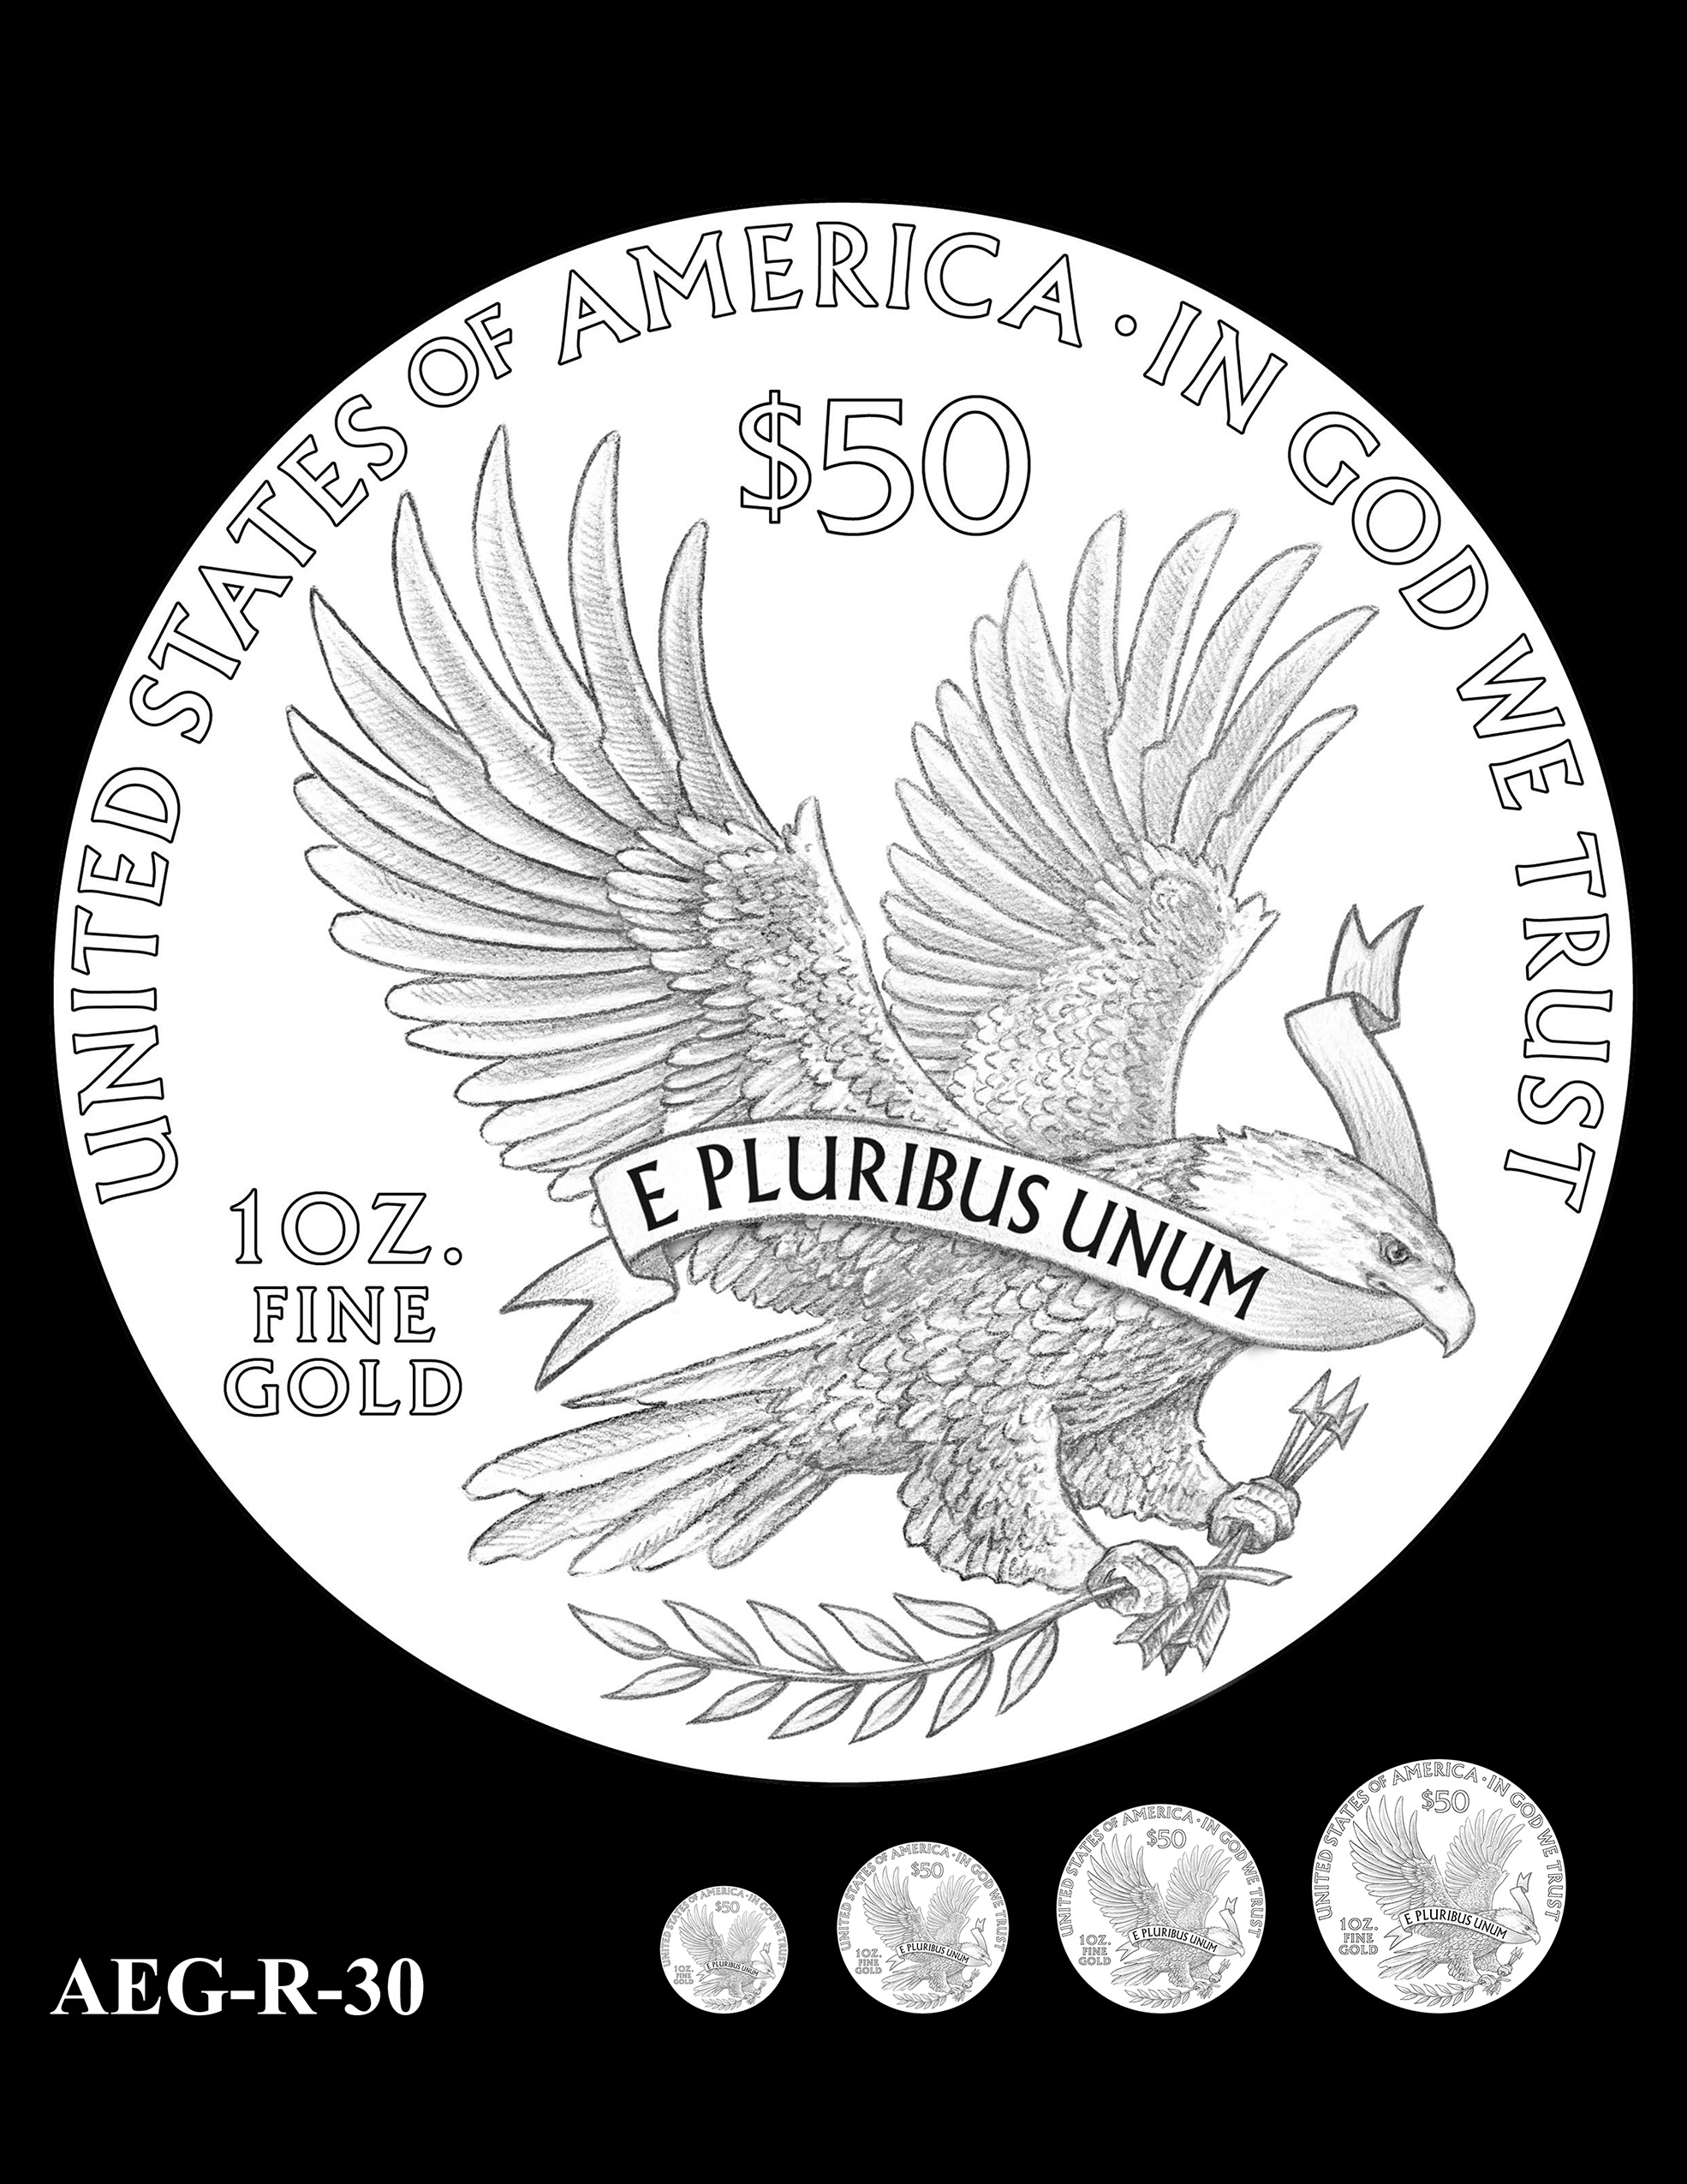 AEG-R-30 -- American Eagle Proof and Bullion Gold Coin - Reverse